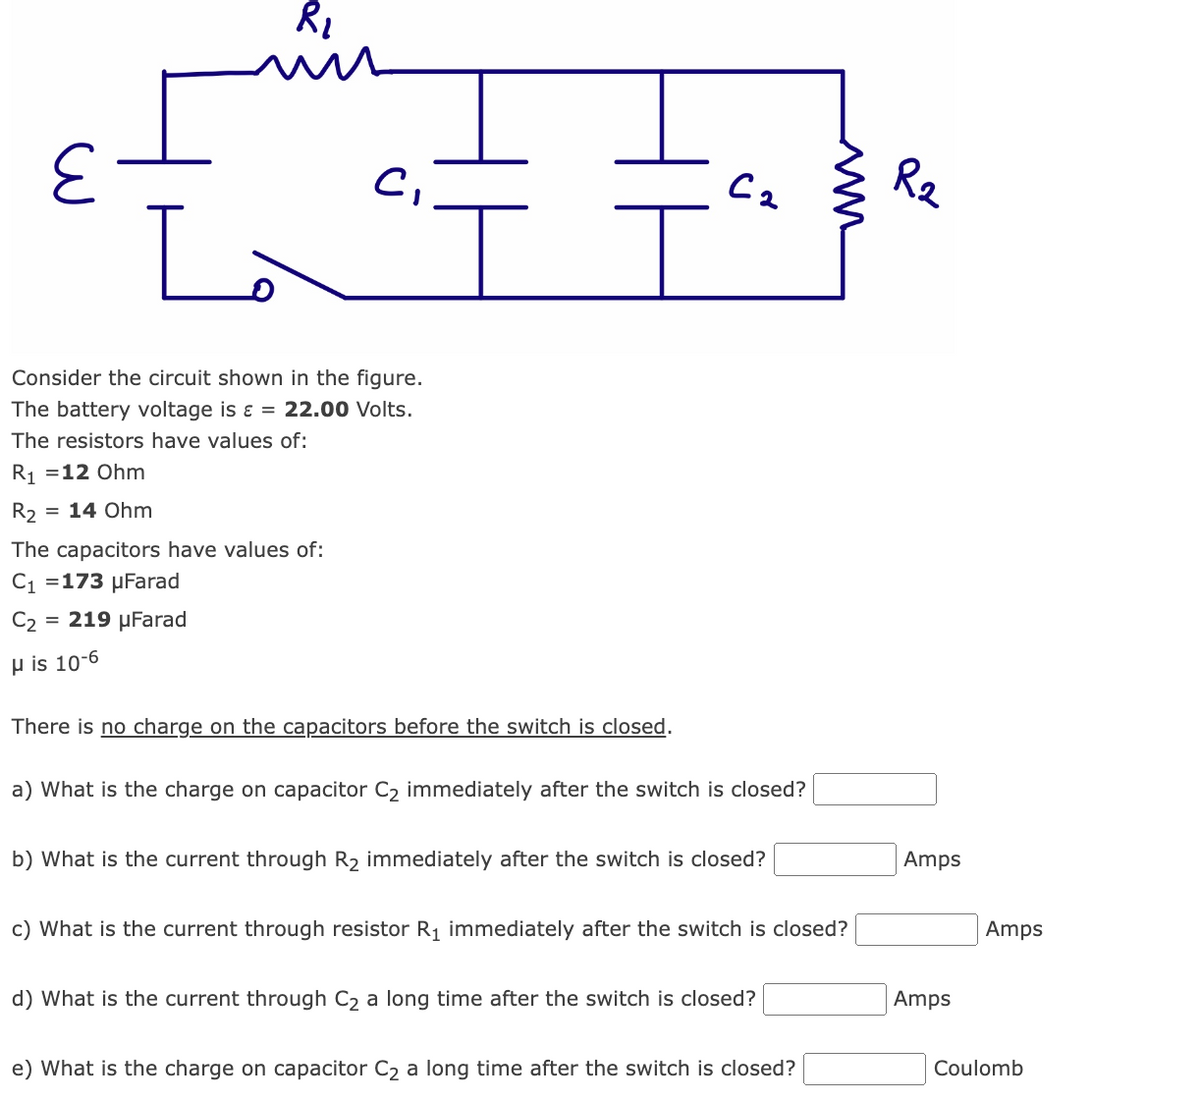 R₂
R₁
La
Consider the circuit shown in the figure.
The battery voltage is ε = 22.00 Volts.
The resistors have values of:
R₁ =12 Ohm
= 14 Ohm
C₁
The capacitors have values of:
C₁ =173 μFarad
C₂ = 219 μFarad
μ is 10-6
There is no charge on the capacitors before the switch is closed.
Са
a) What is the charge on capacitor C₂ immediately after the switch is closed?
b) What is the current through R₂ immediately after the switch is closed?
c) What is the current through resistor R₁ immediately after the switch is closed?
d) What is the current through C₂ a long time after the switch is closed?
w
e) What is the charge on capacitor C₂ a long time after the switch is closed?
R2
Amps
Amps
Amps
Coulomb